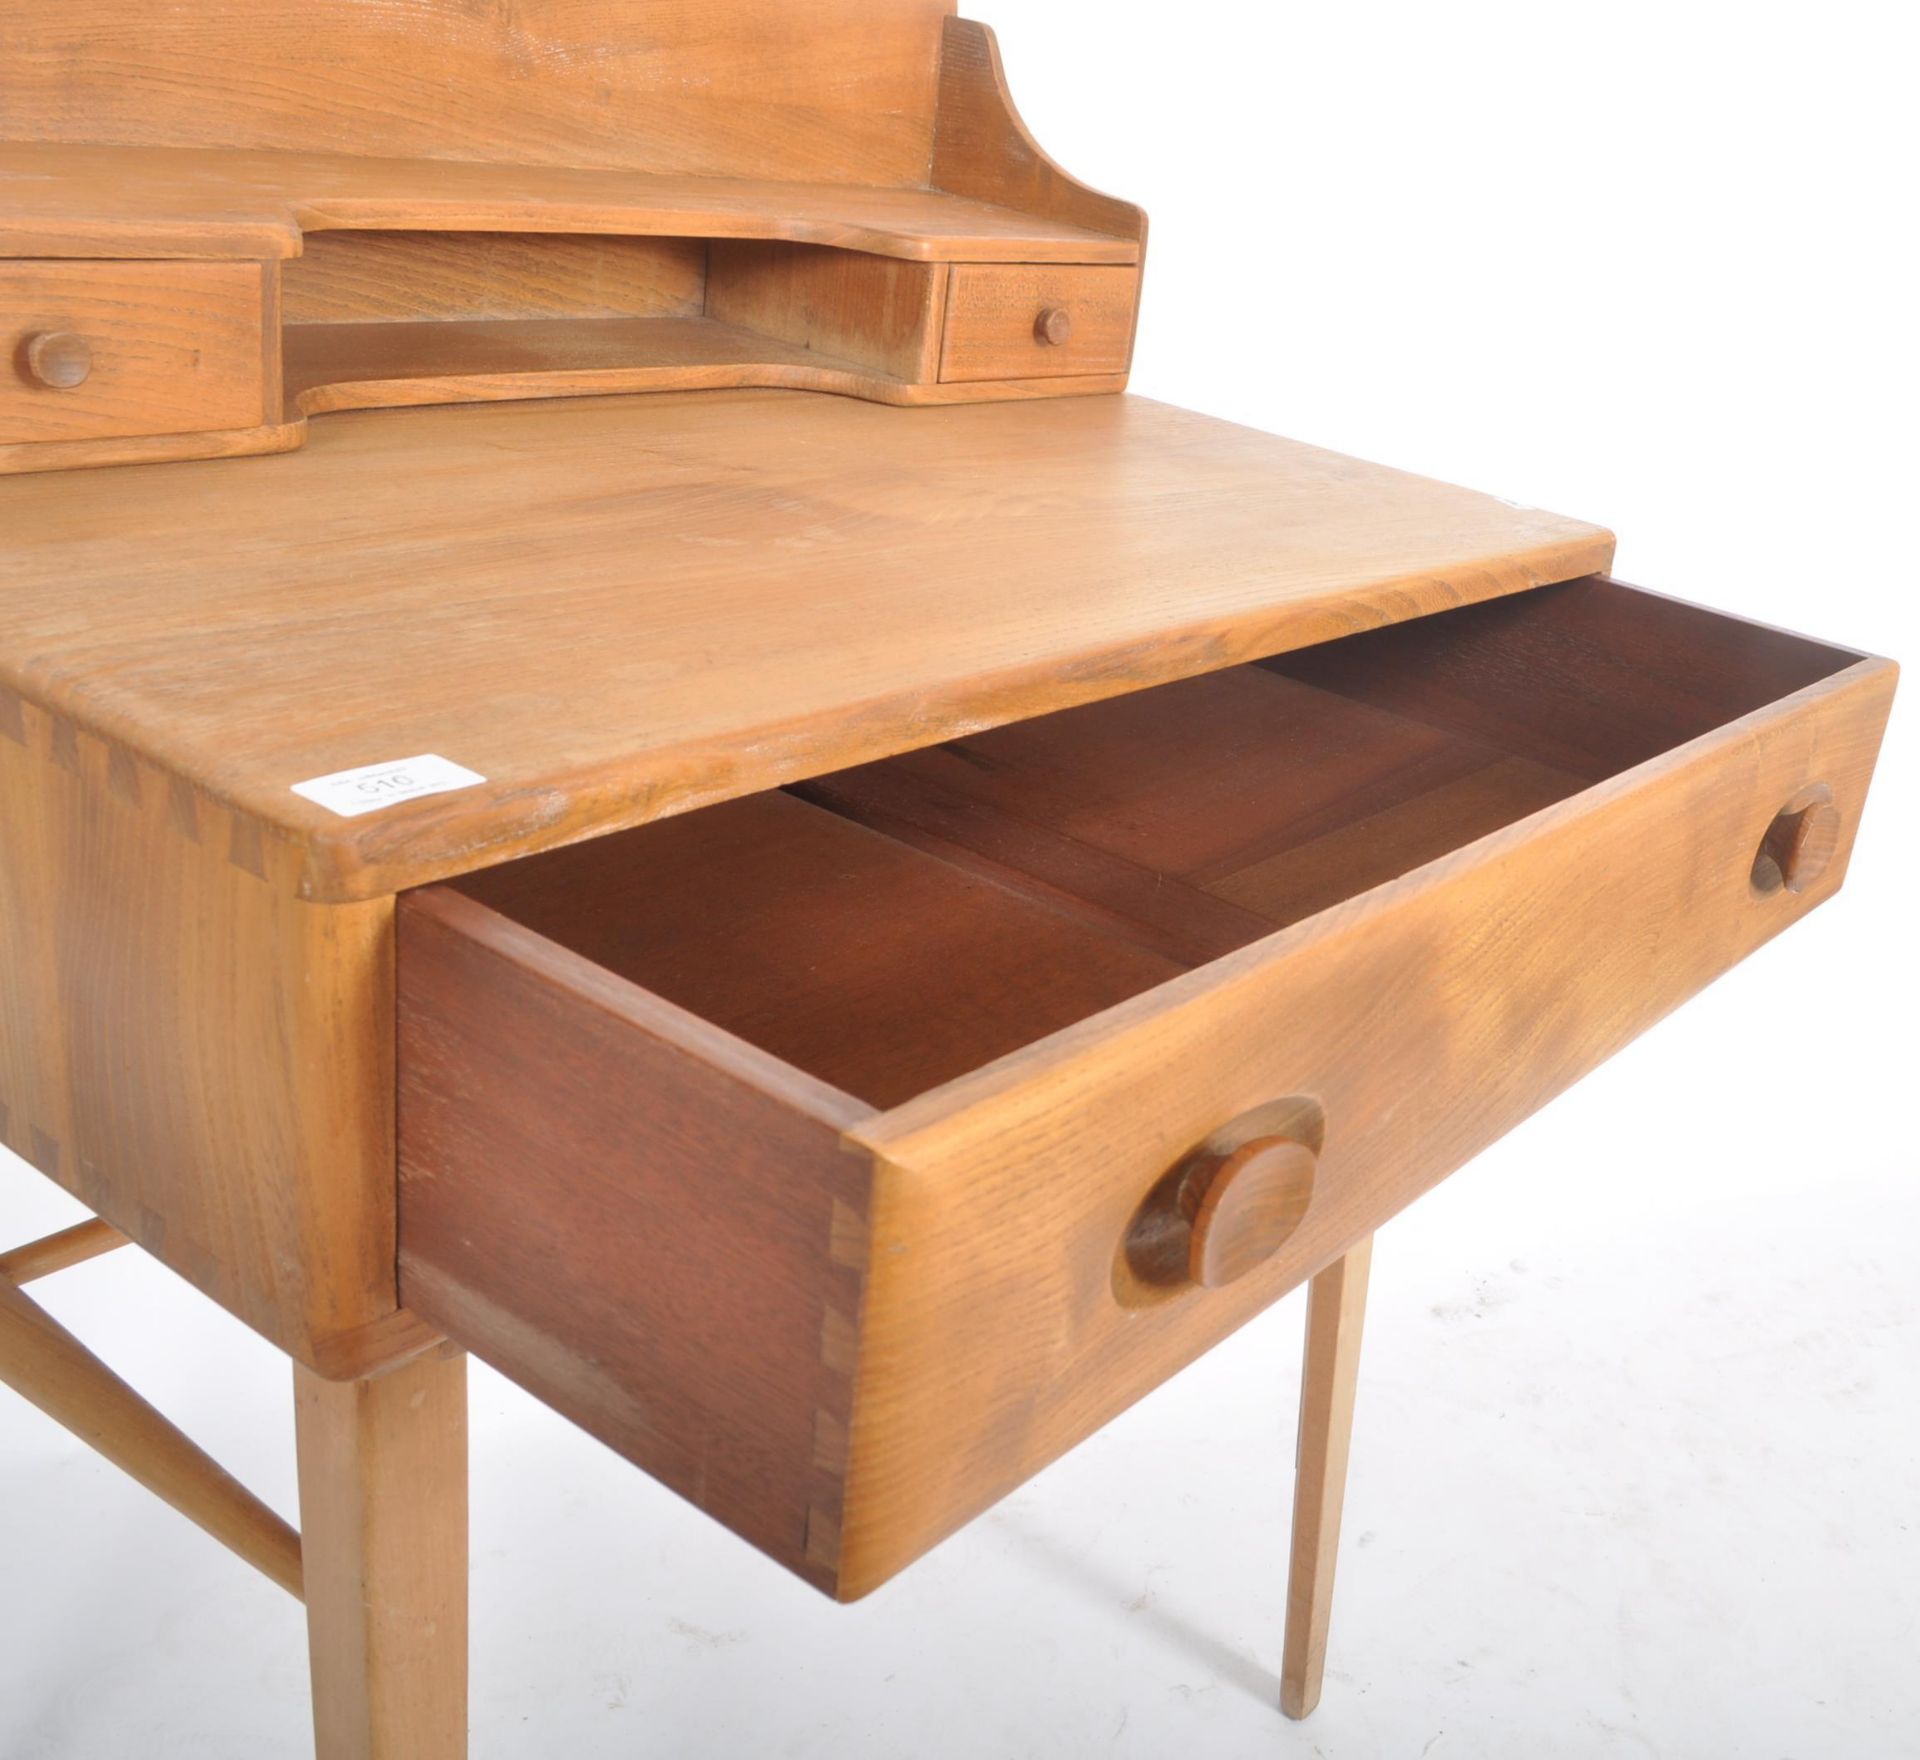 ERCOL WINDSOR MODEL 479 BEECH AND ELM WOOD DESK BY LUCIAN ERCOLANI - Image 5 of 7